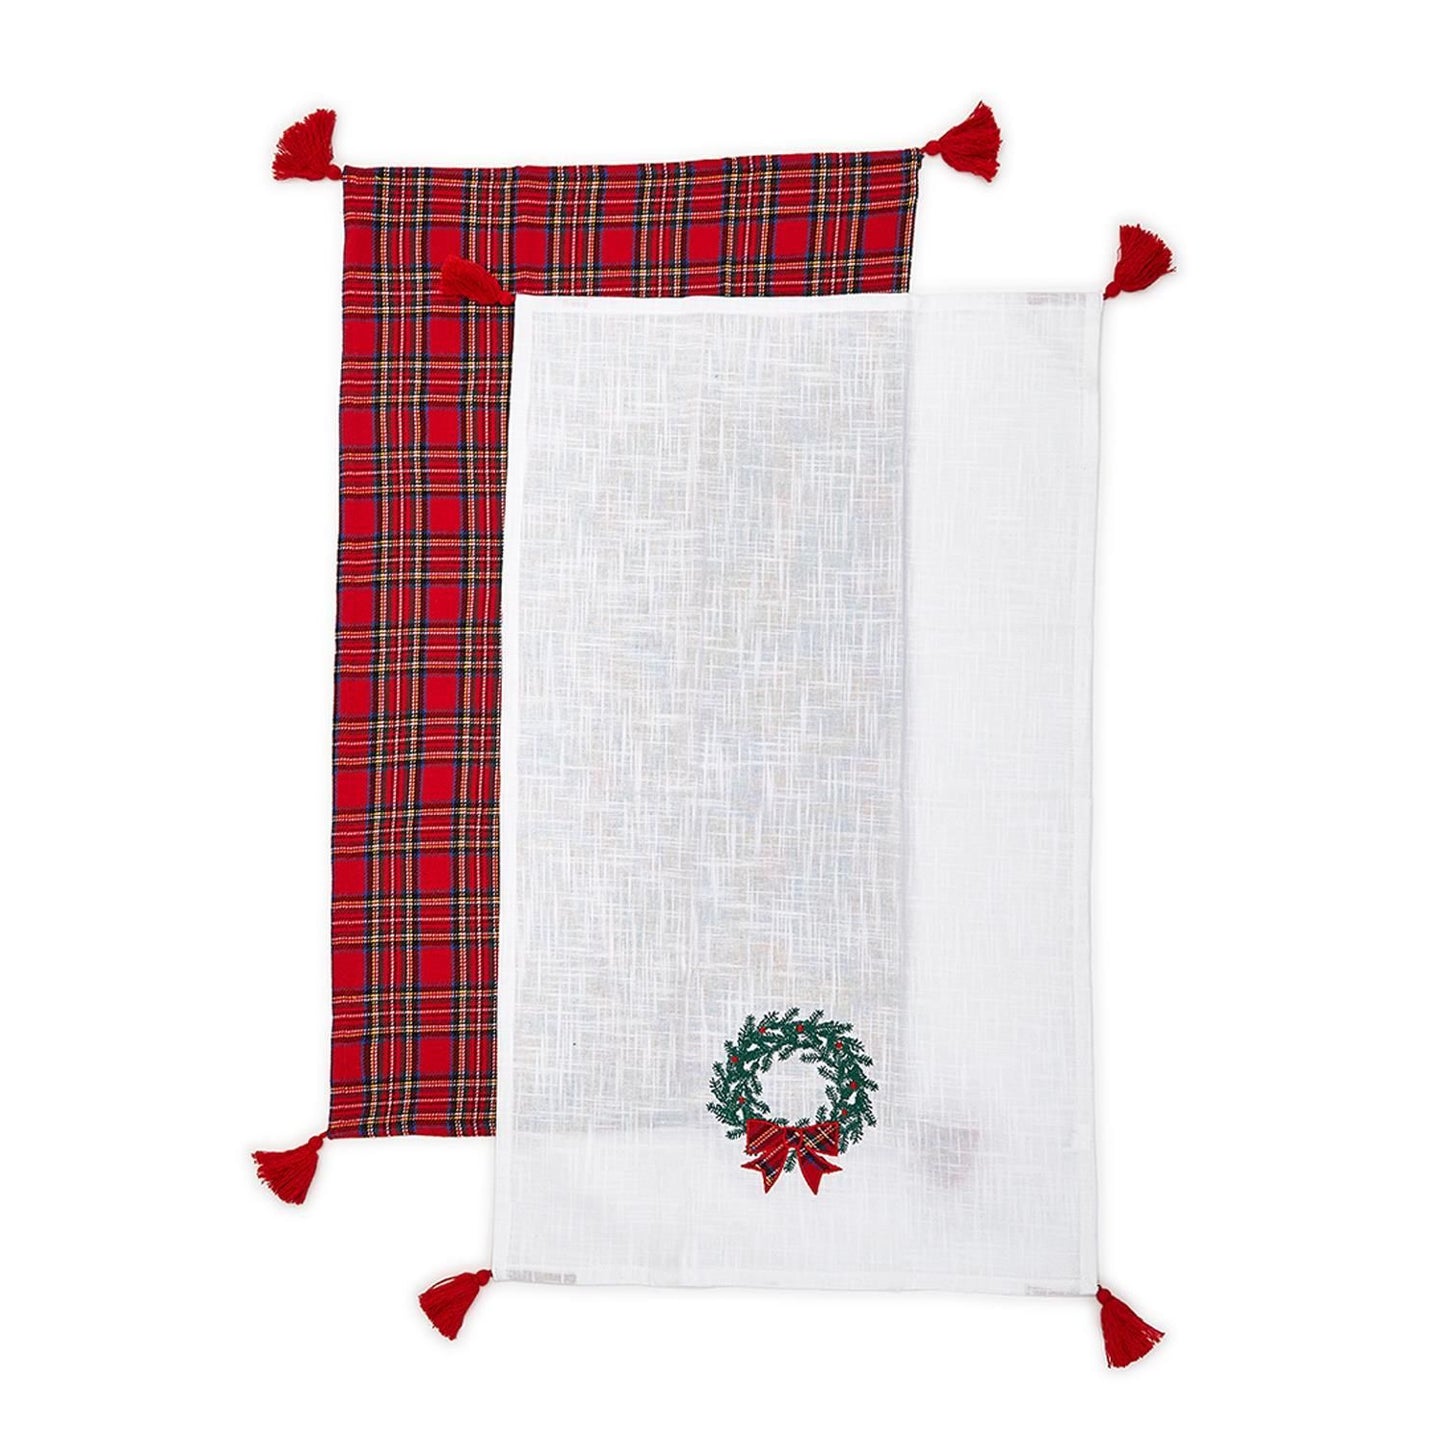 Two's Company Tartan Traditions Assorted of 4 Designs Dish Towels, 2 Designs